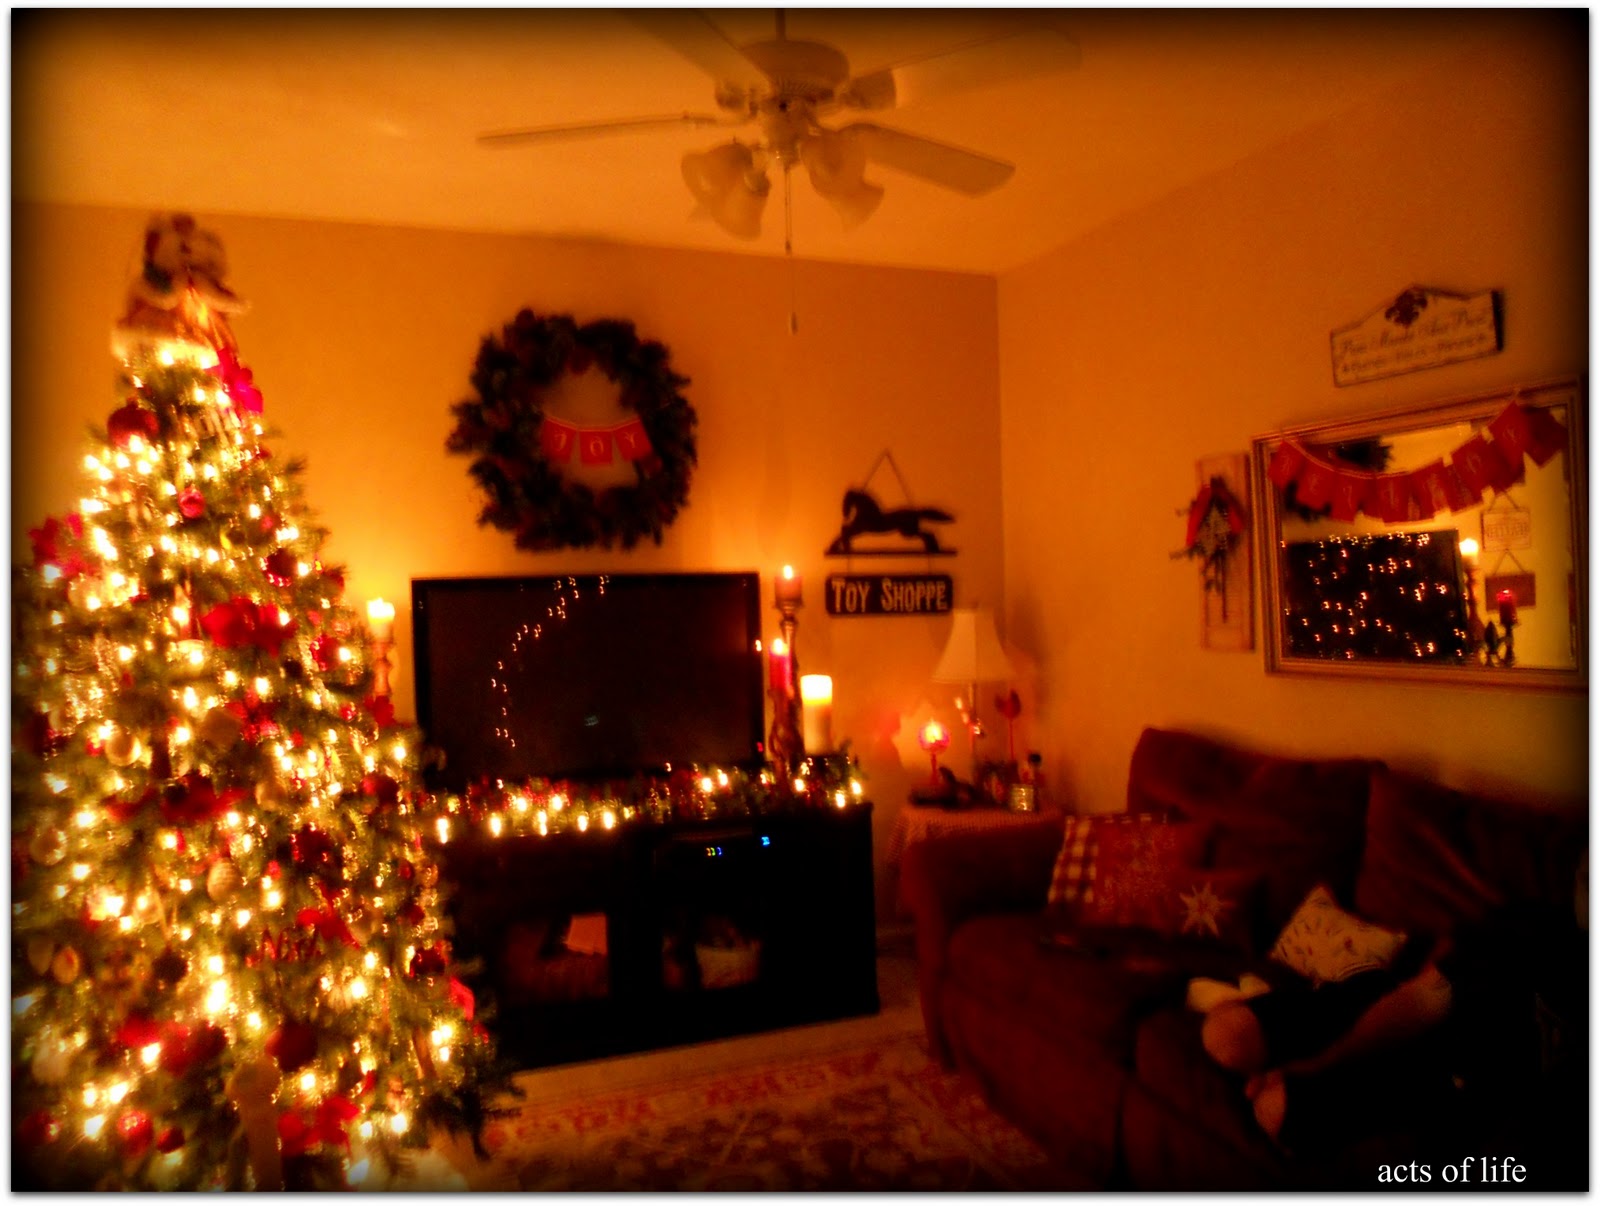 Acts of Life: Christmas at night in the Living room